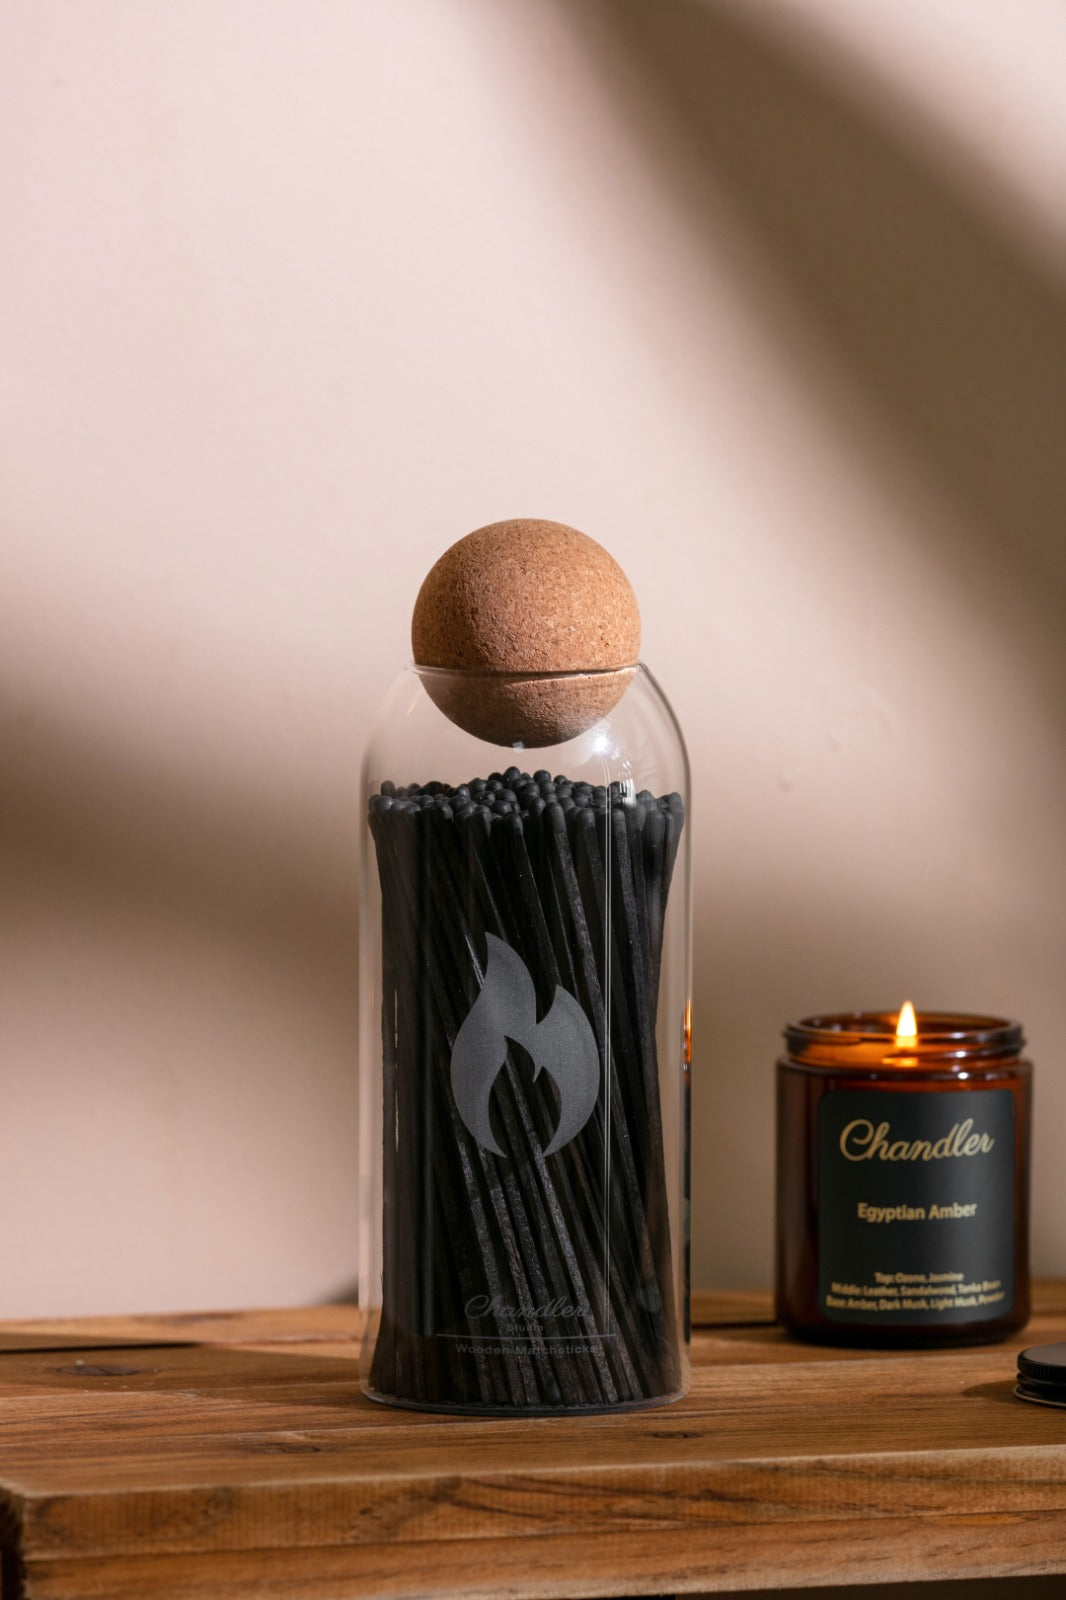 Fireplace - Candle Matches | Apothecary Decorative Glass Bottle - Approx. 210 Long Matchsticks in Jar